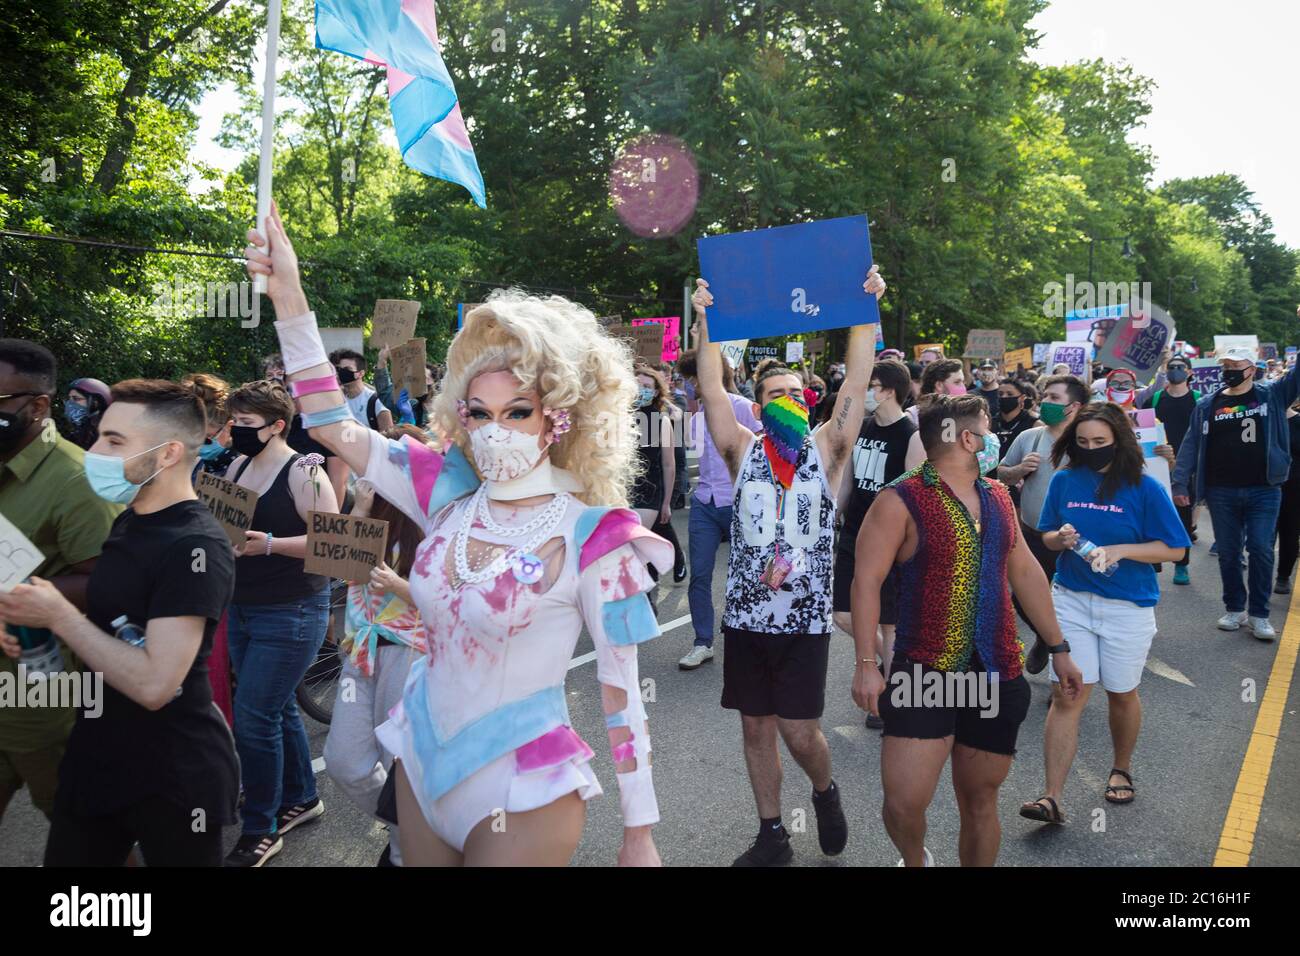 June 13, 2020. Roxbury, MA. Thousands gathered in Franklin Park for a vigil to raise awareness for Black transgender rights and to raise money for the Stock Photo